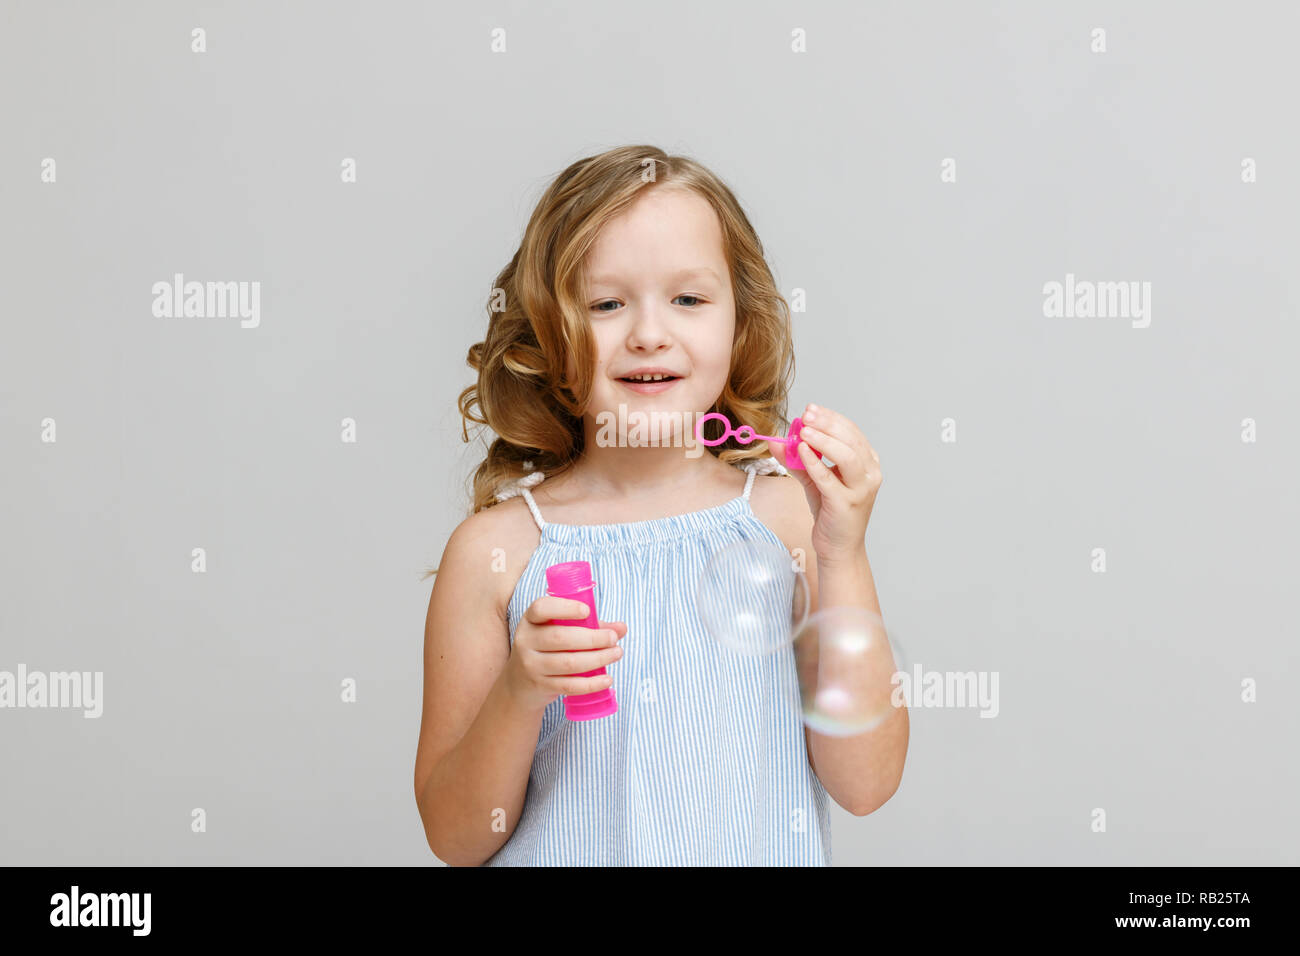 Portrait of a happy smiling little blonde girl on a gray background. Child blowing bubbles Stock Photo